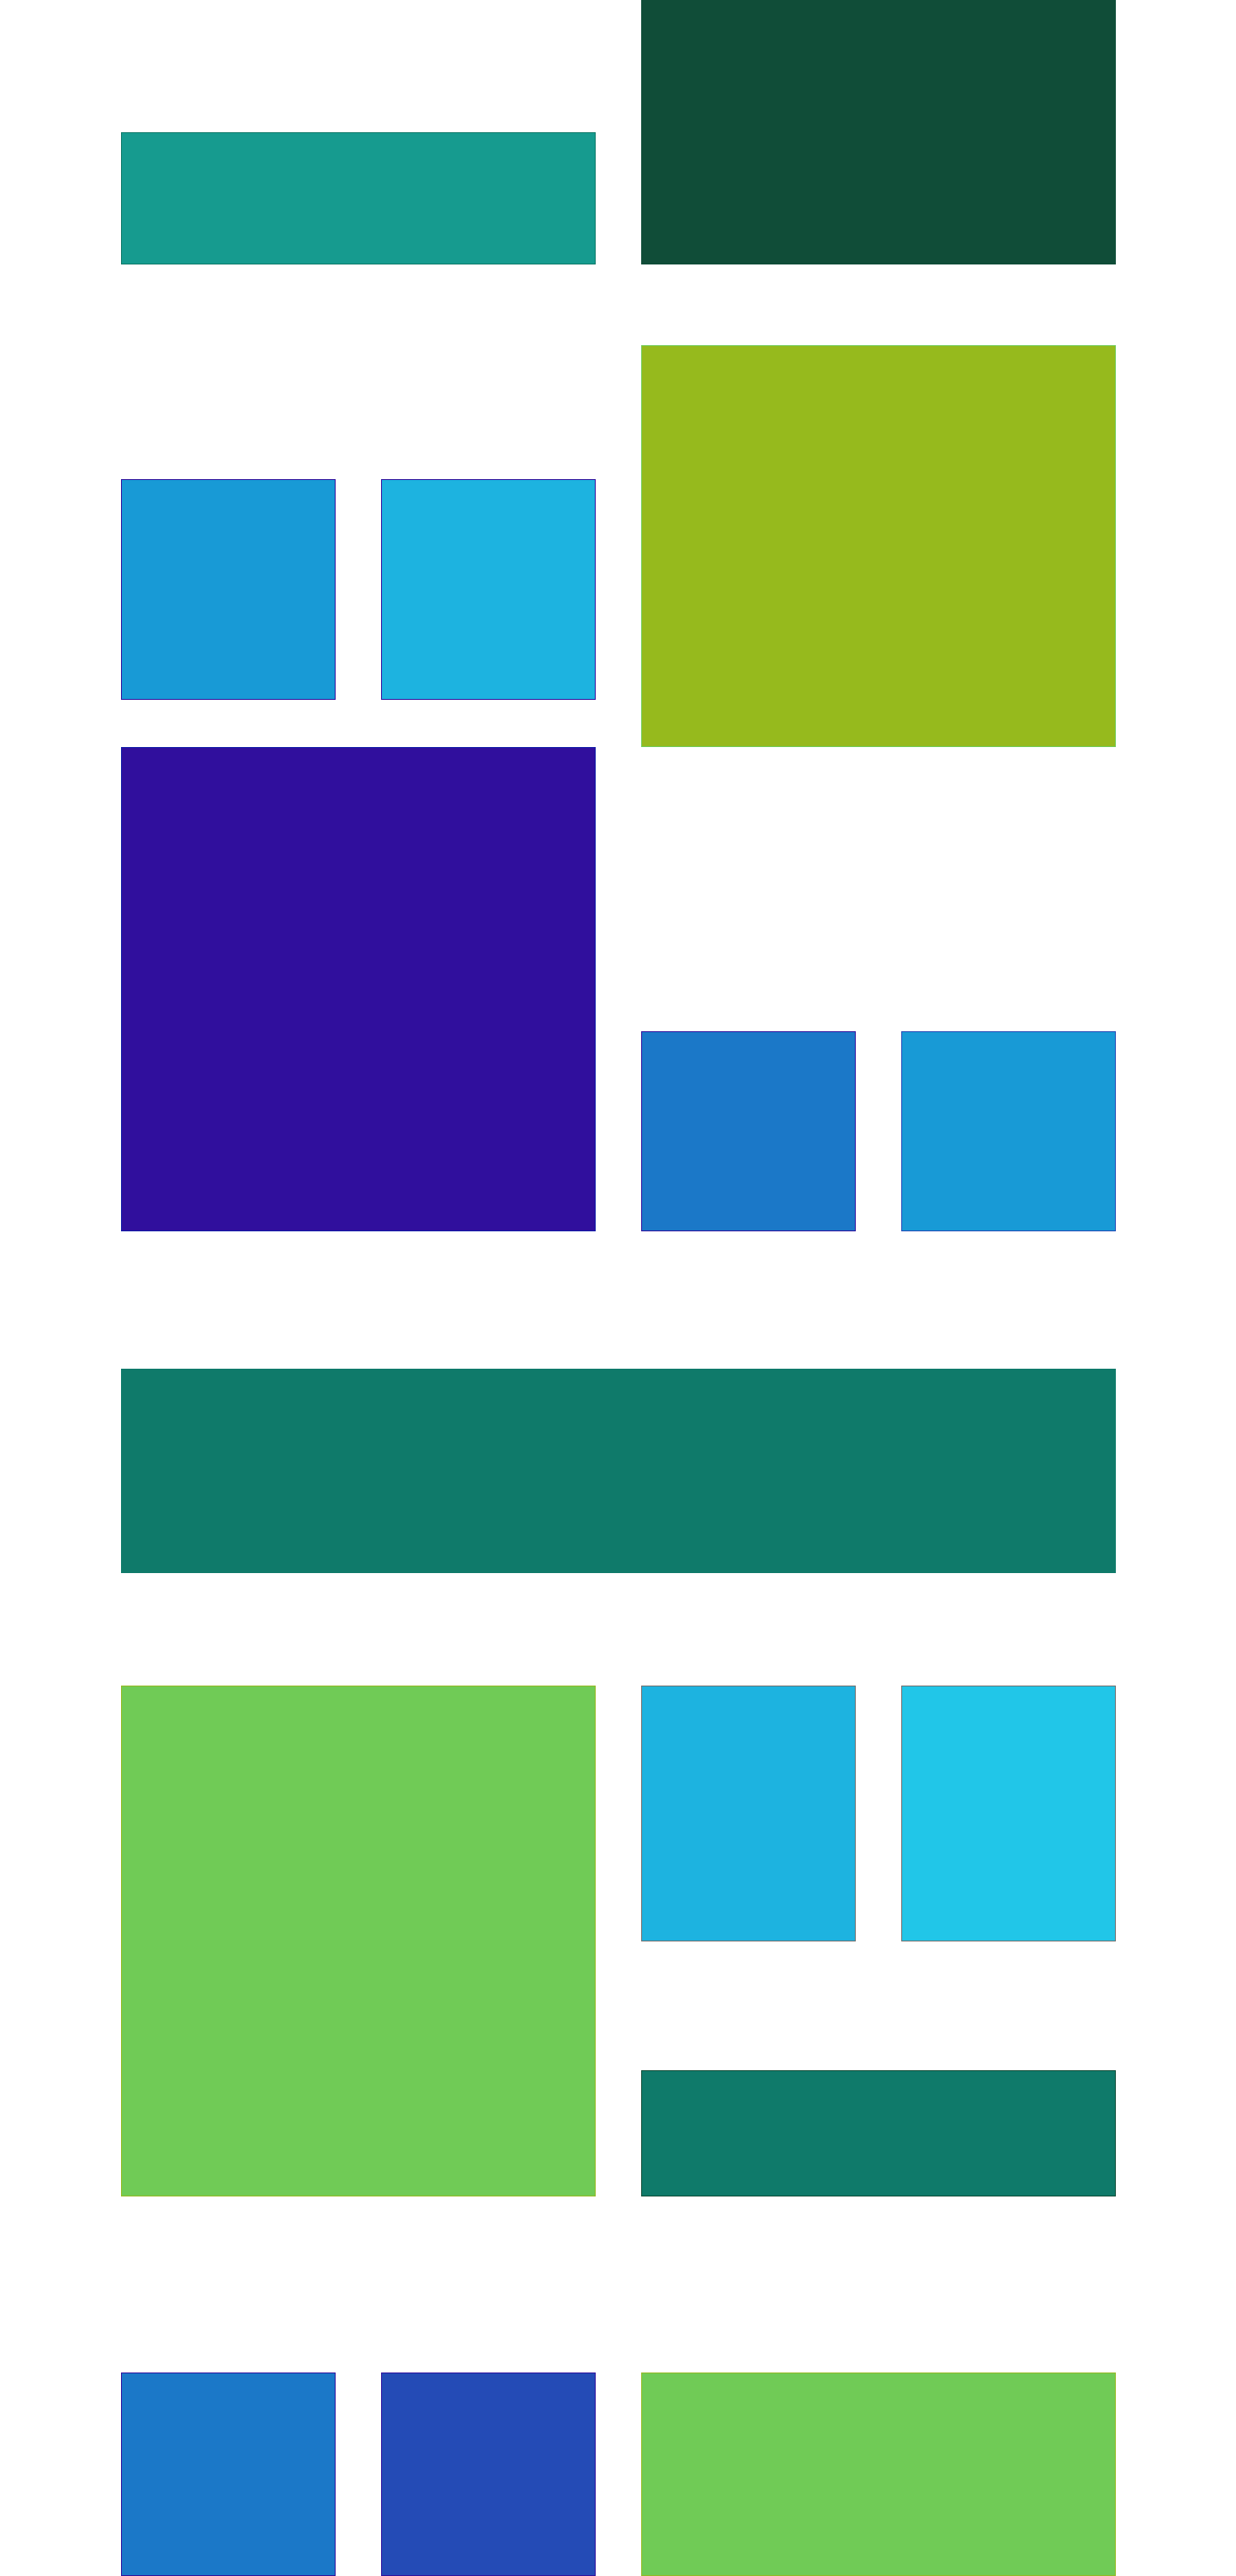 blue and green rectangles